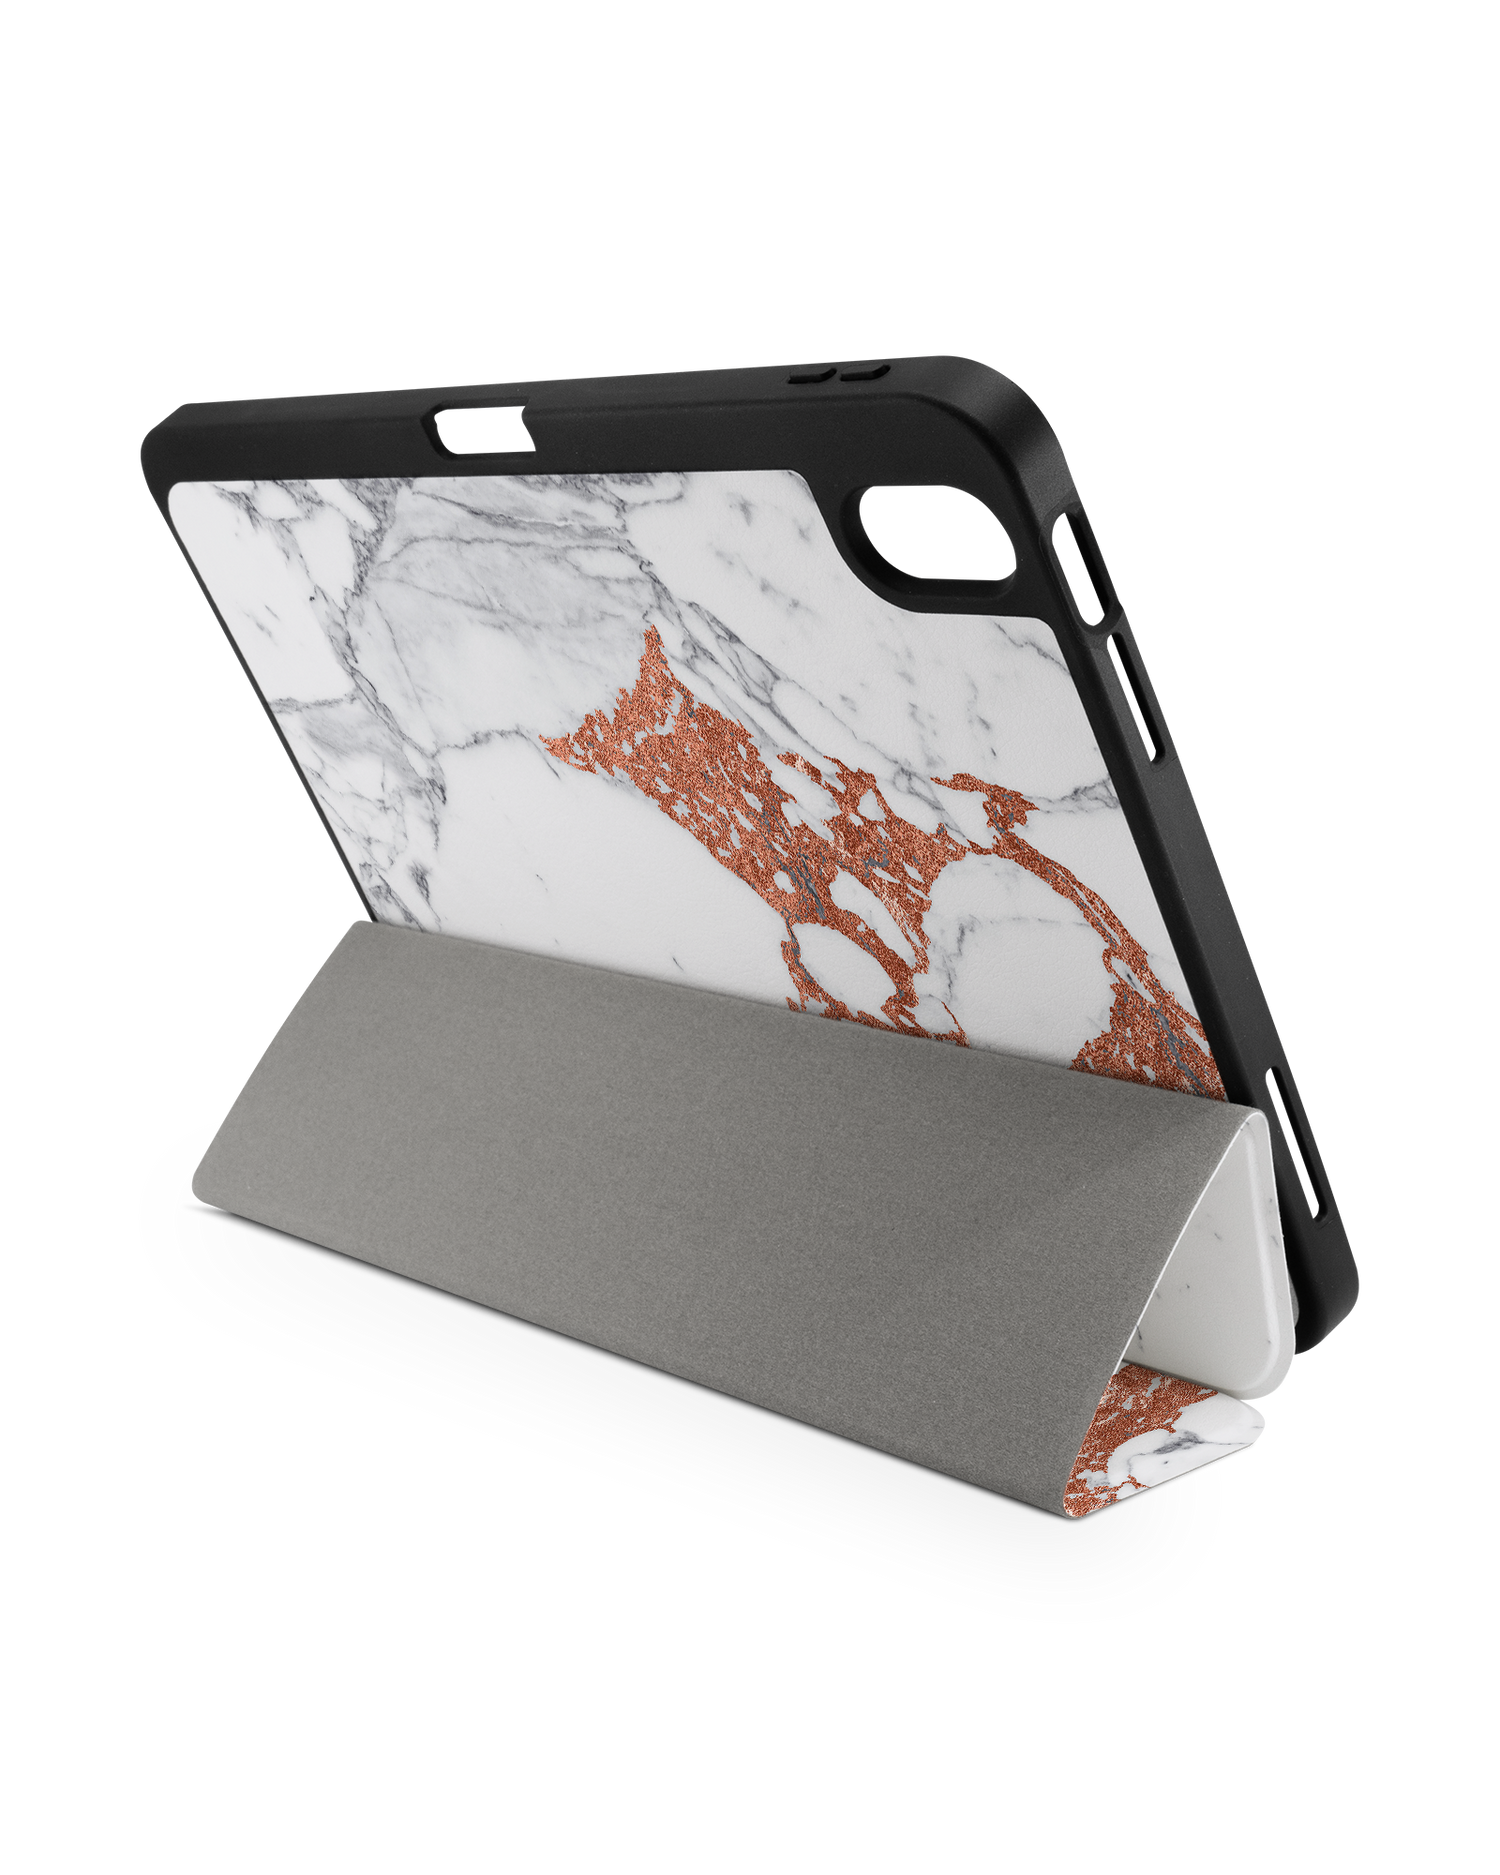 Marble Mix iPad Case with Pencil Holder for Apple iPad (10th Generation): Set up in landscape format (back view)